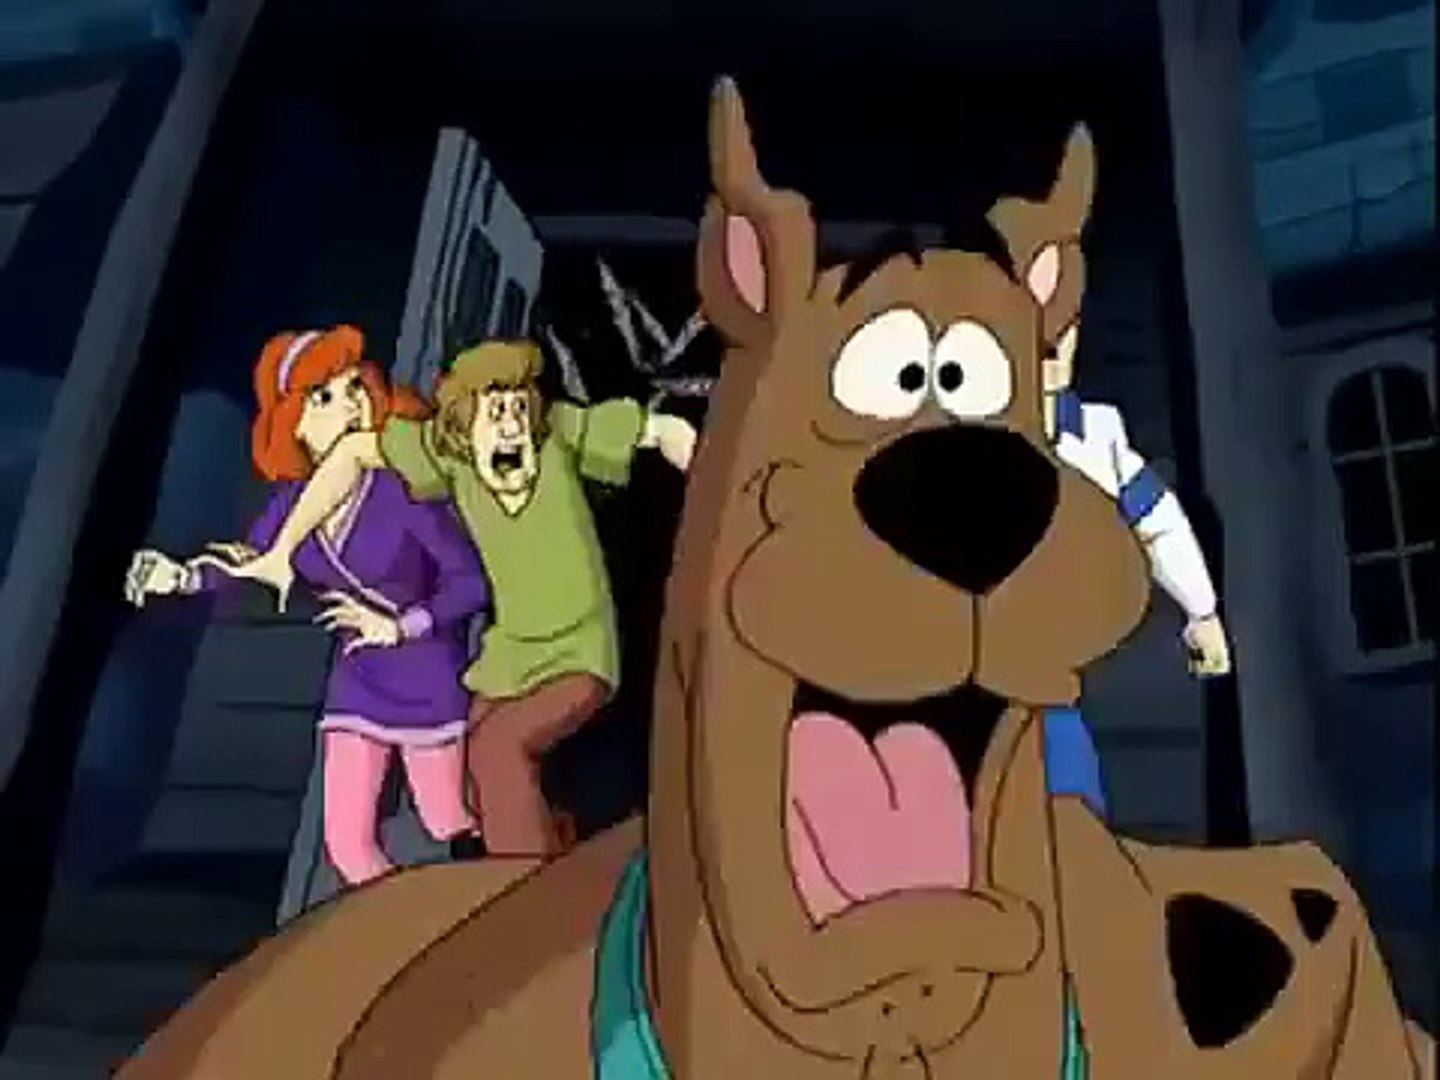 What's New, Scooby-Doo? (Theme Song) - video Dailymotion